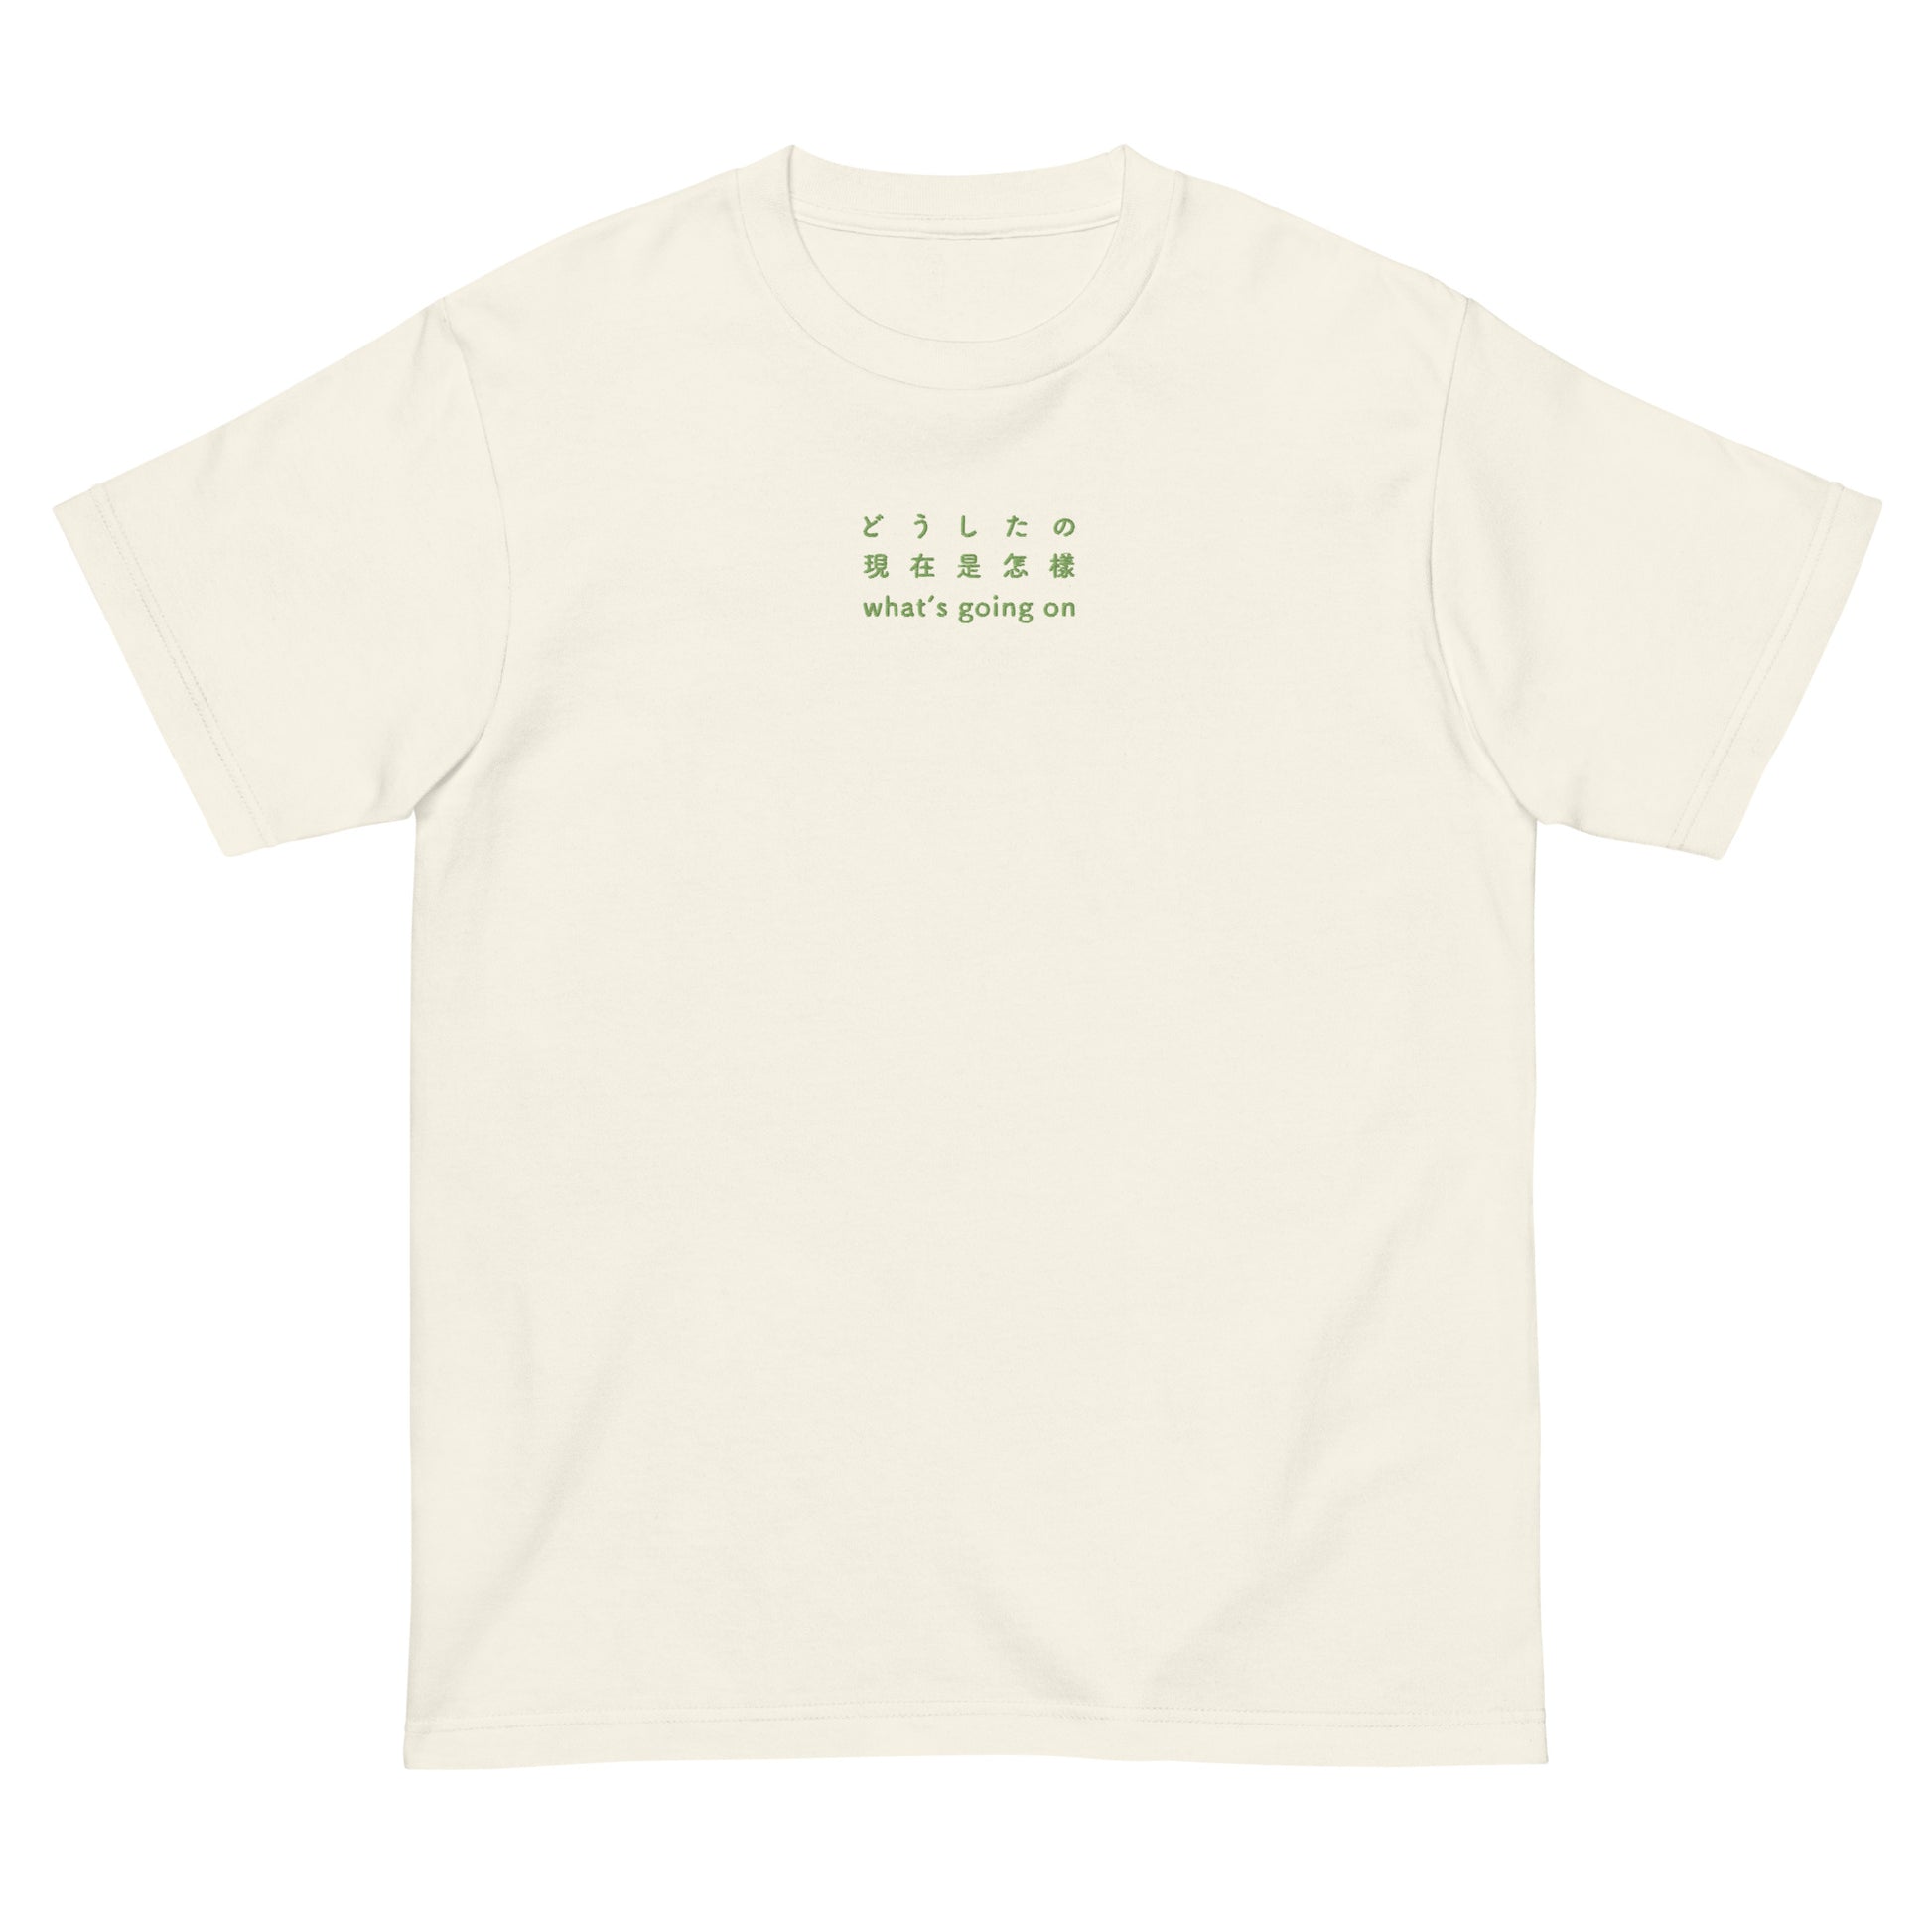 Ivory High Quality Tee - Front Design with an Green Embroidery "What's going on" in Japanese,Chinese and English